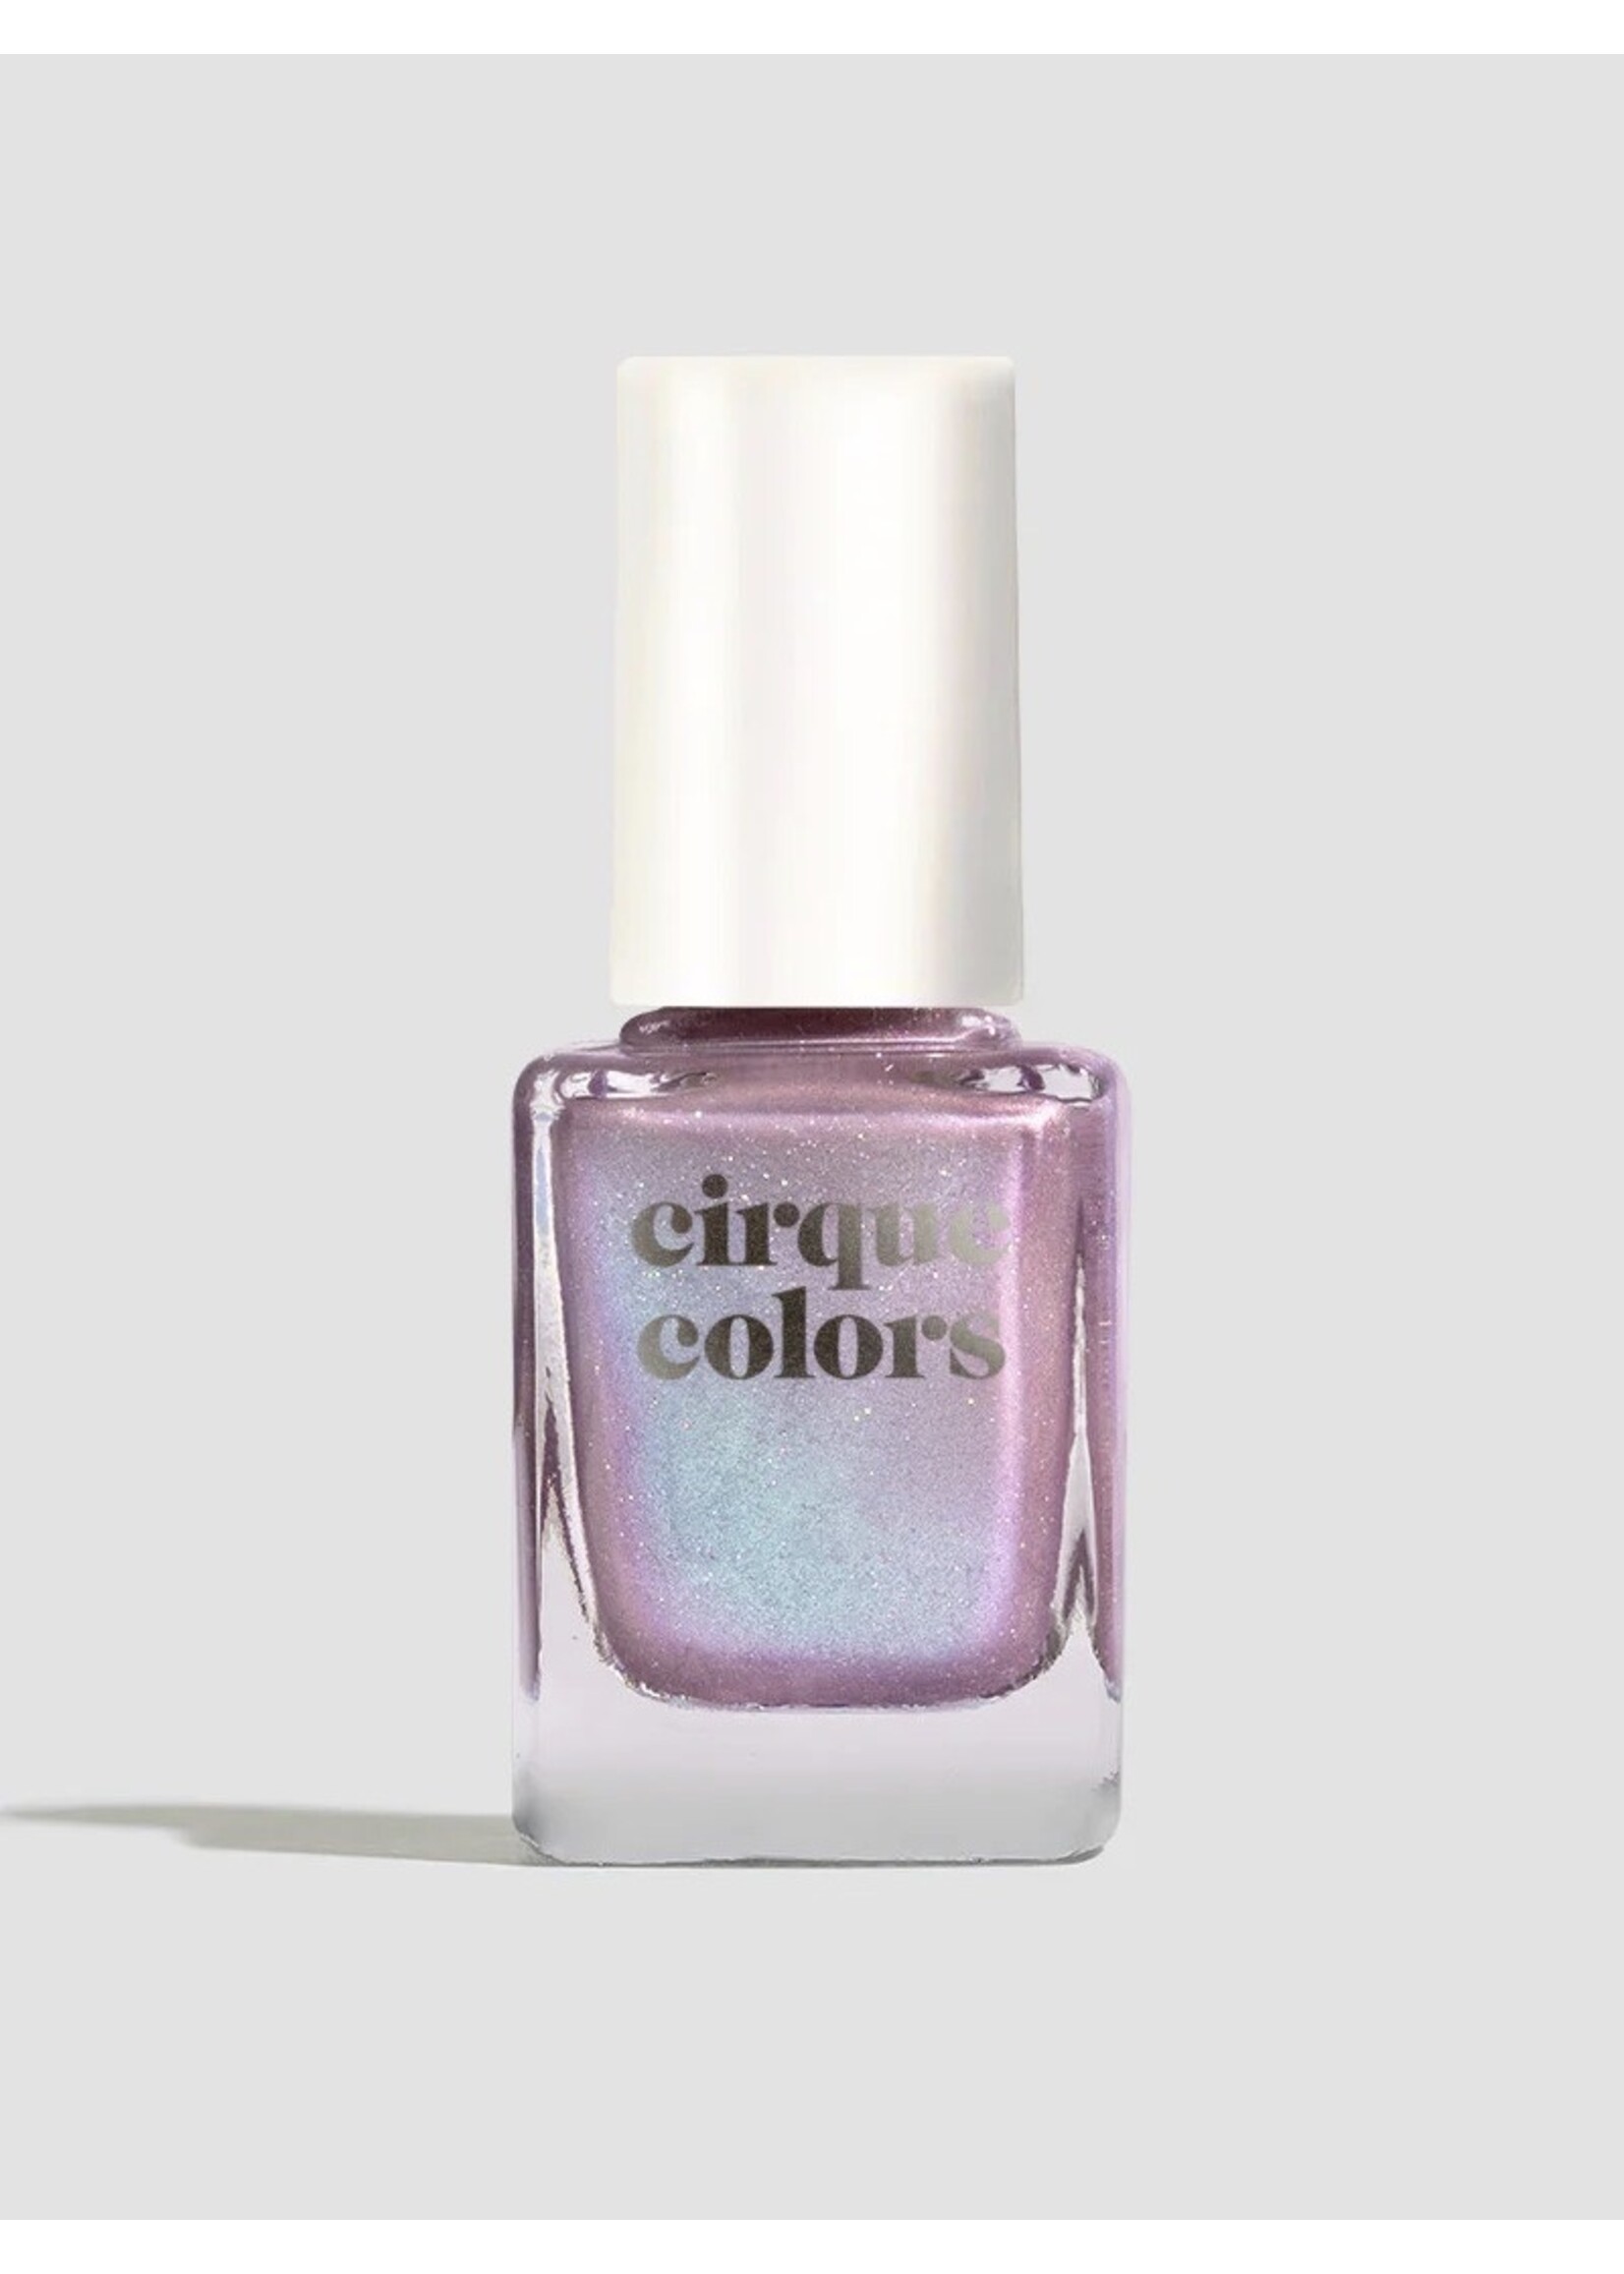 Cirque Colors Nail polishes "Surfer's Crush" by Cirque Colors